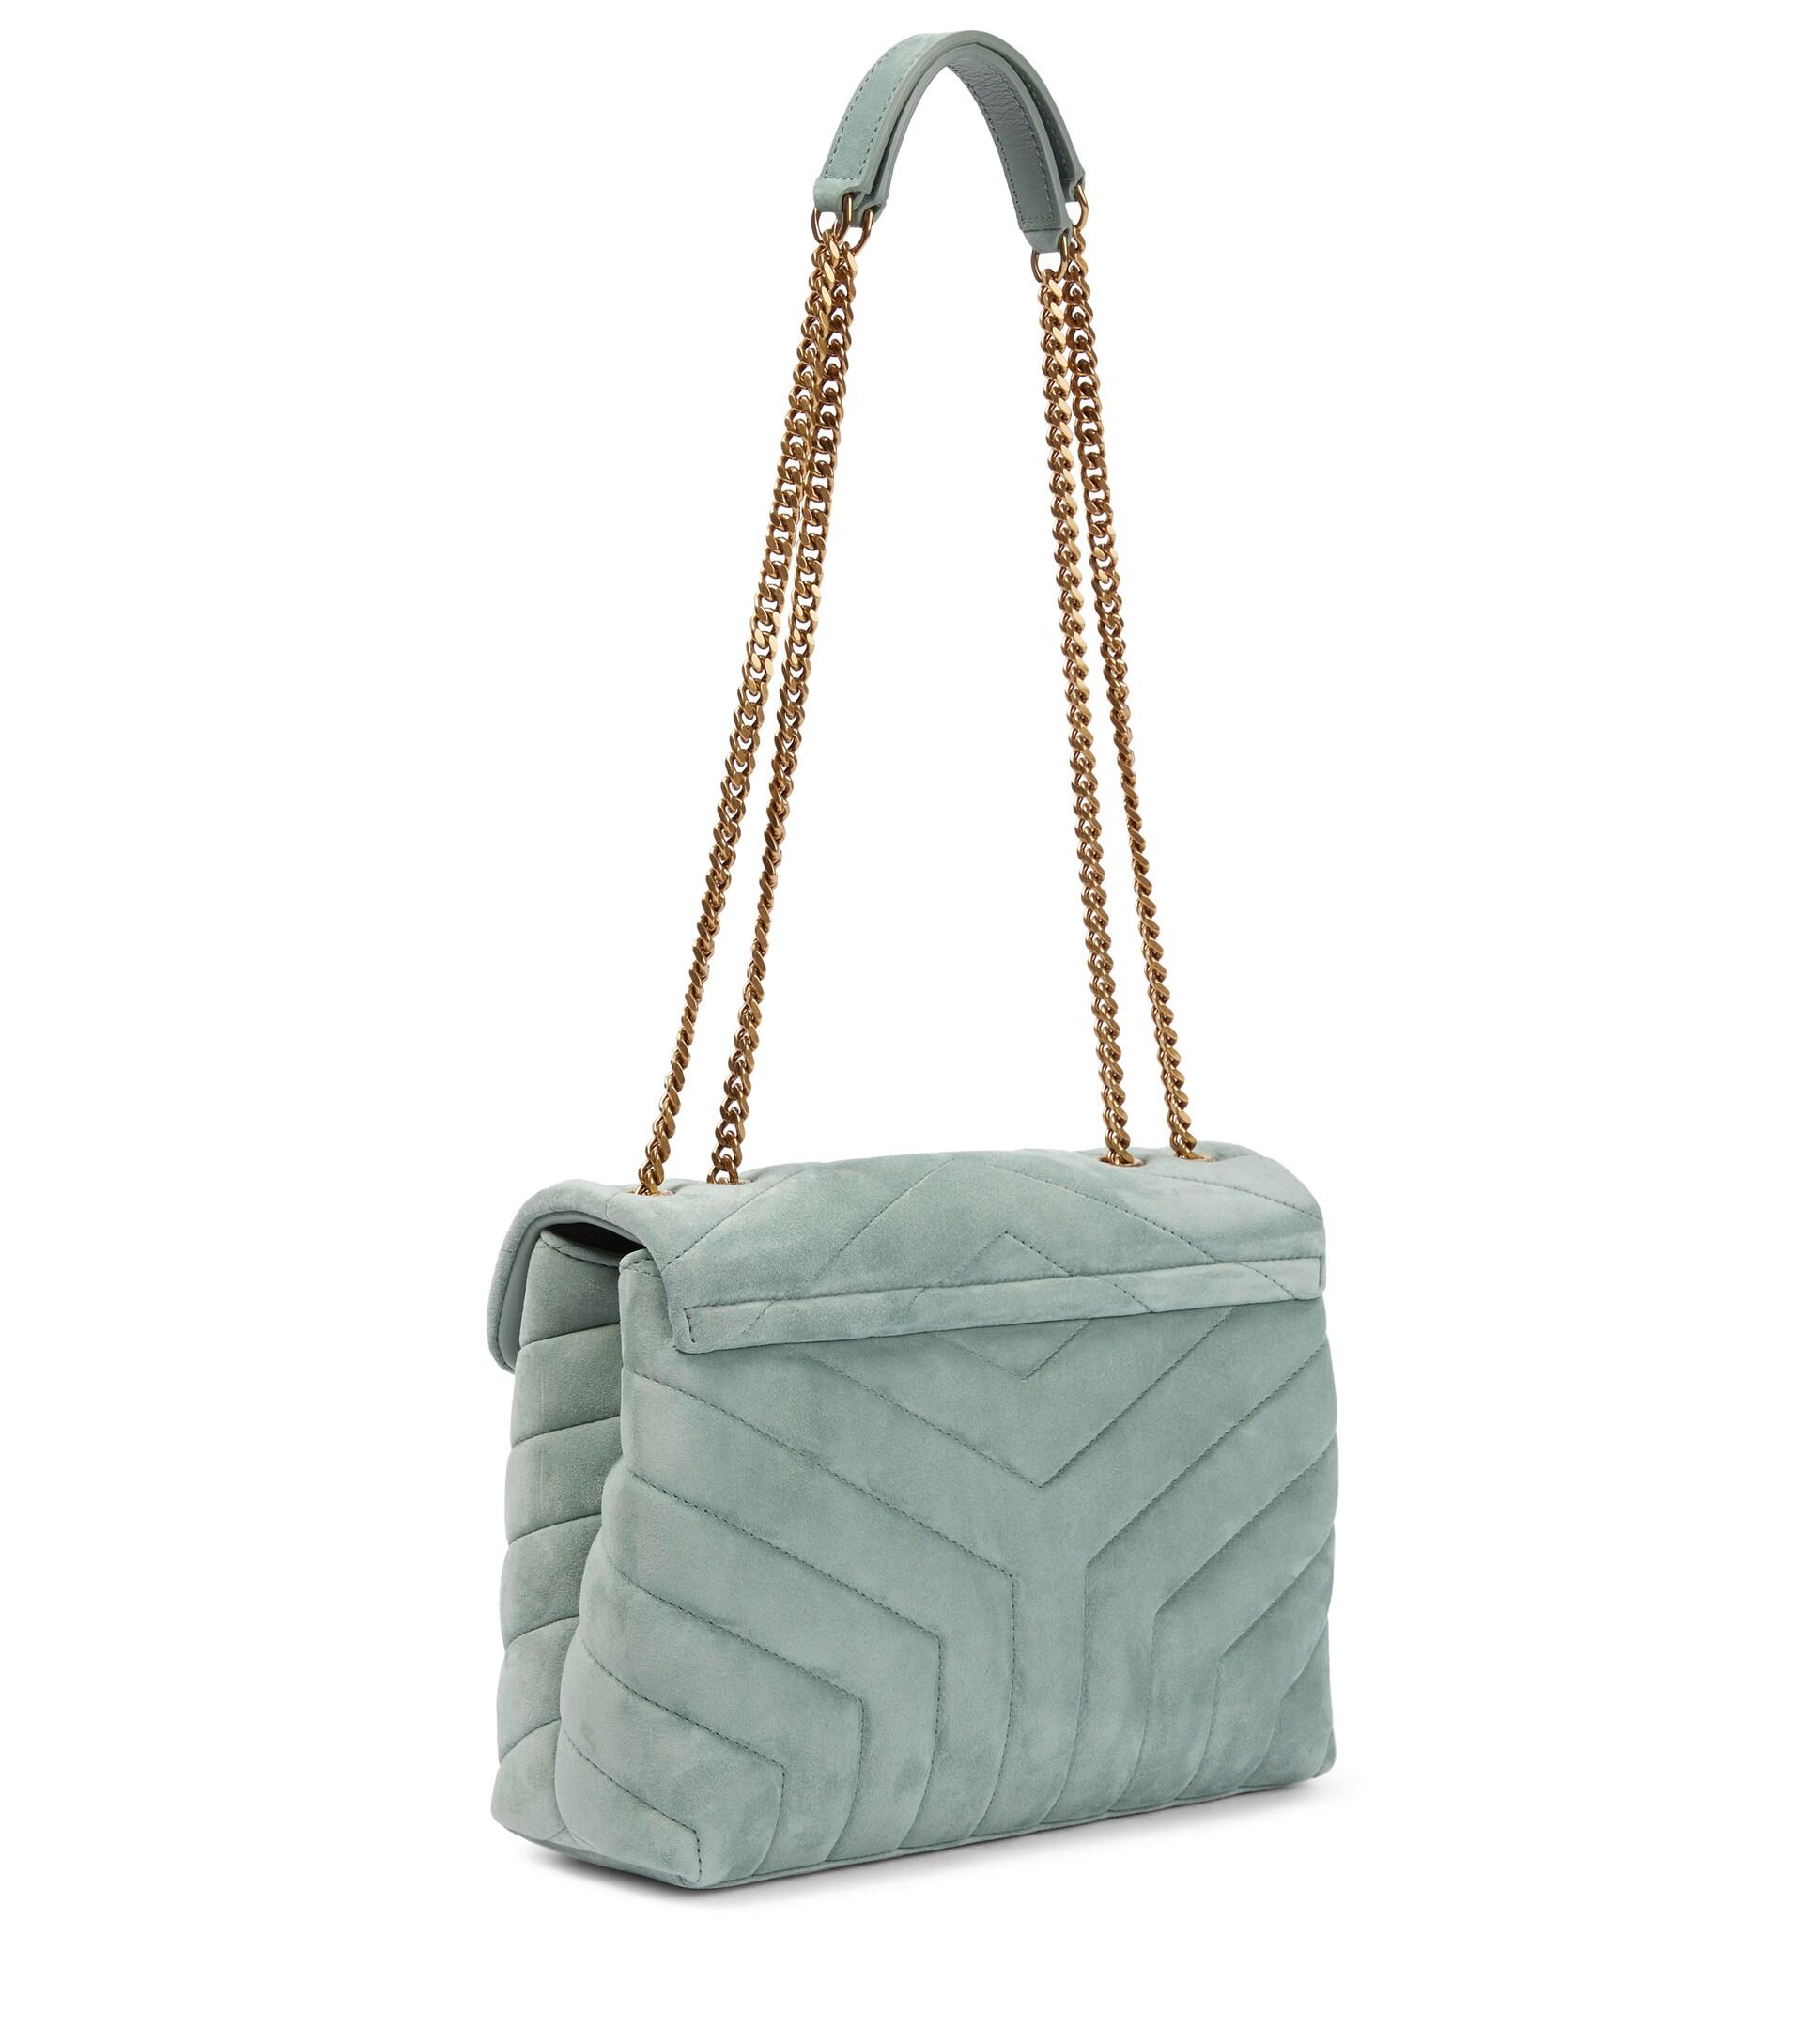 Saint Laurent Loulou Small Suede Shoulder Bag in Green | Lyst